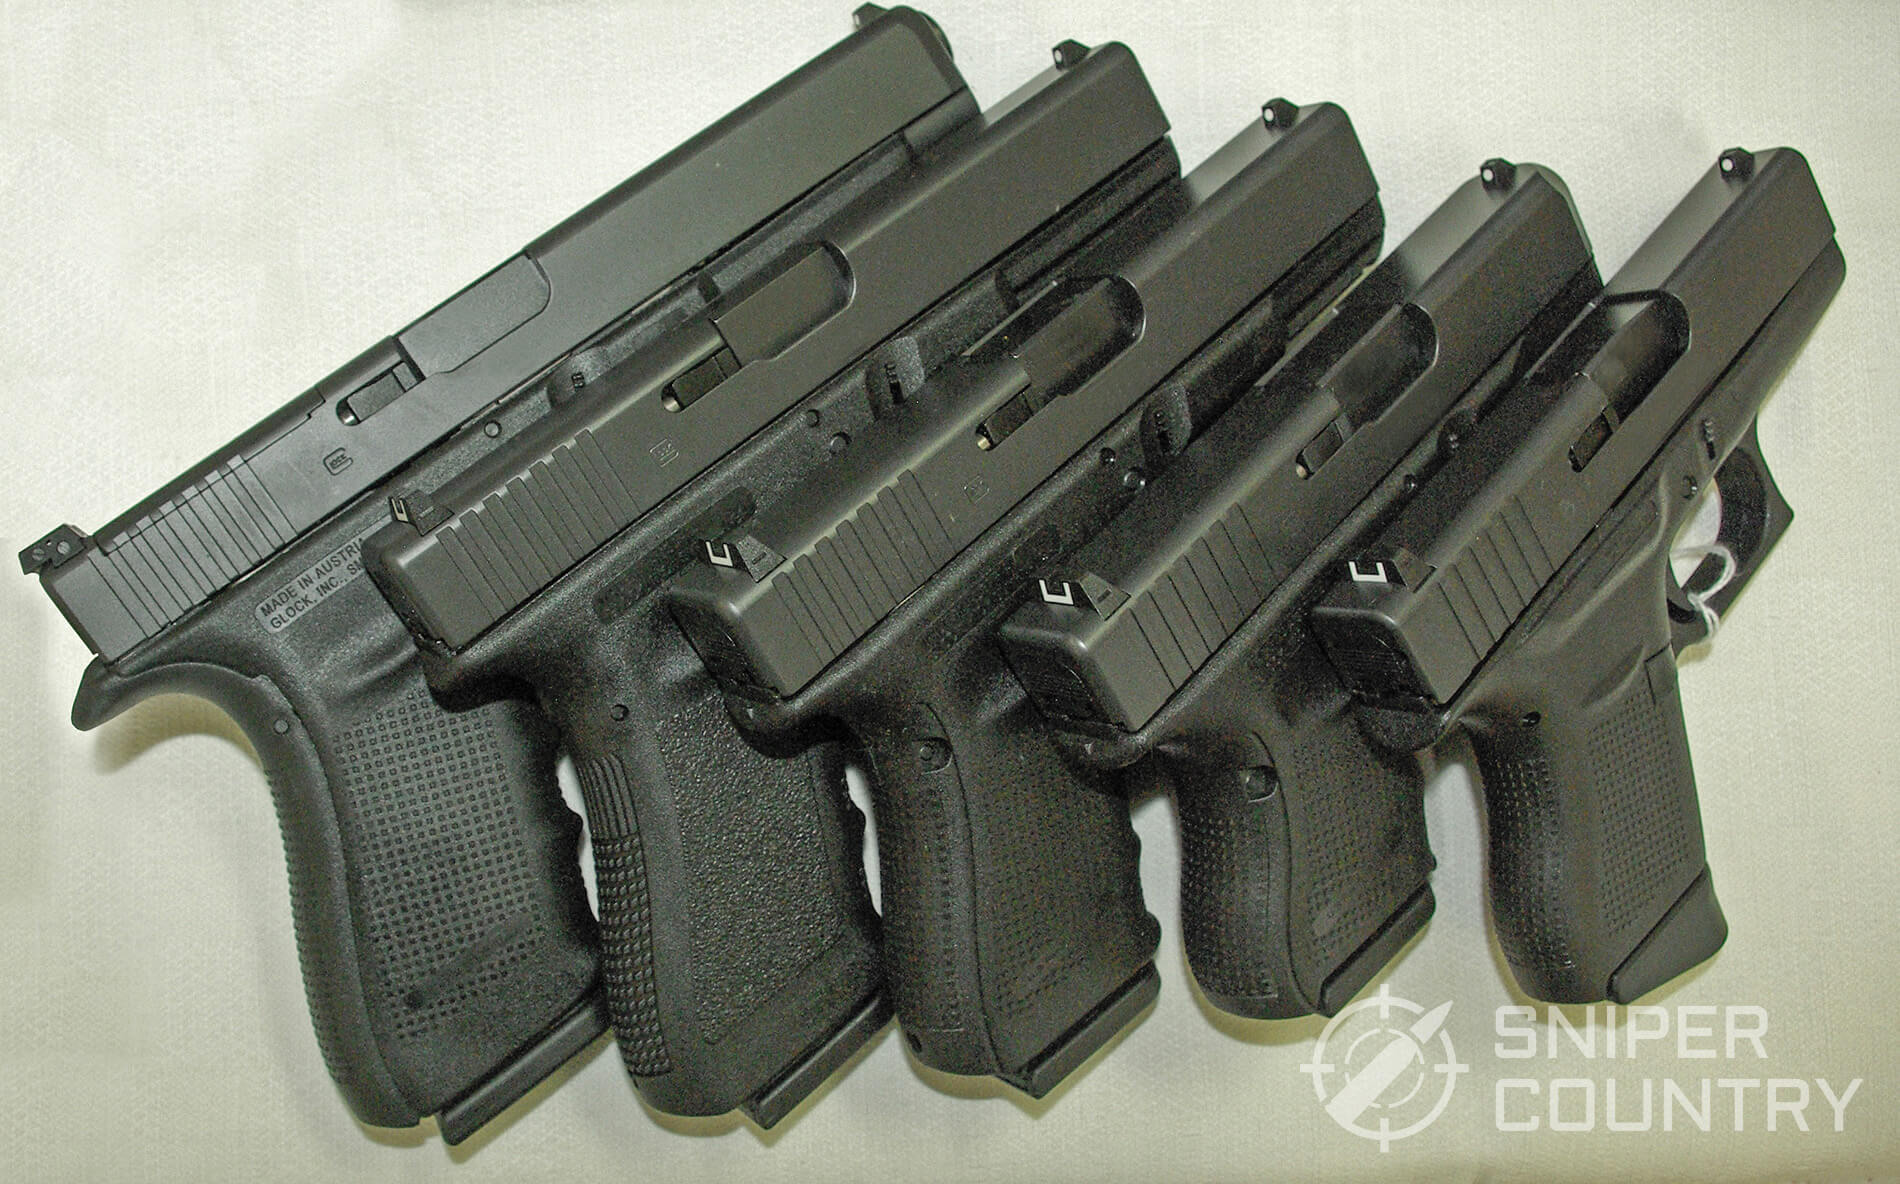 9mm Glock Models [Ultimate Guide] - Sniper Country